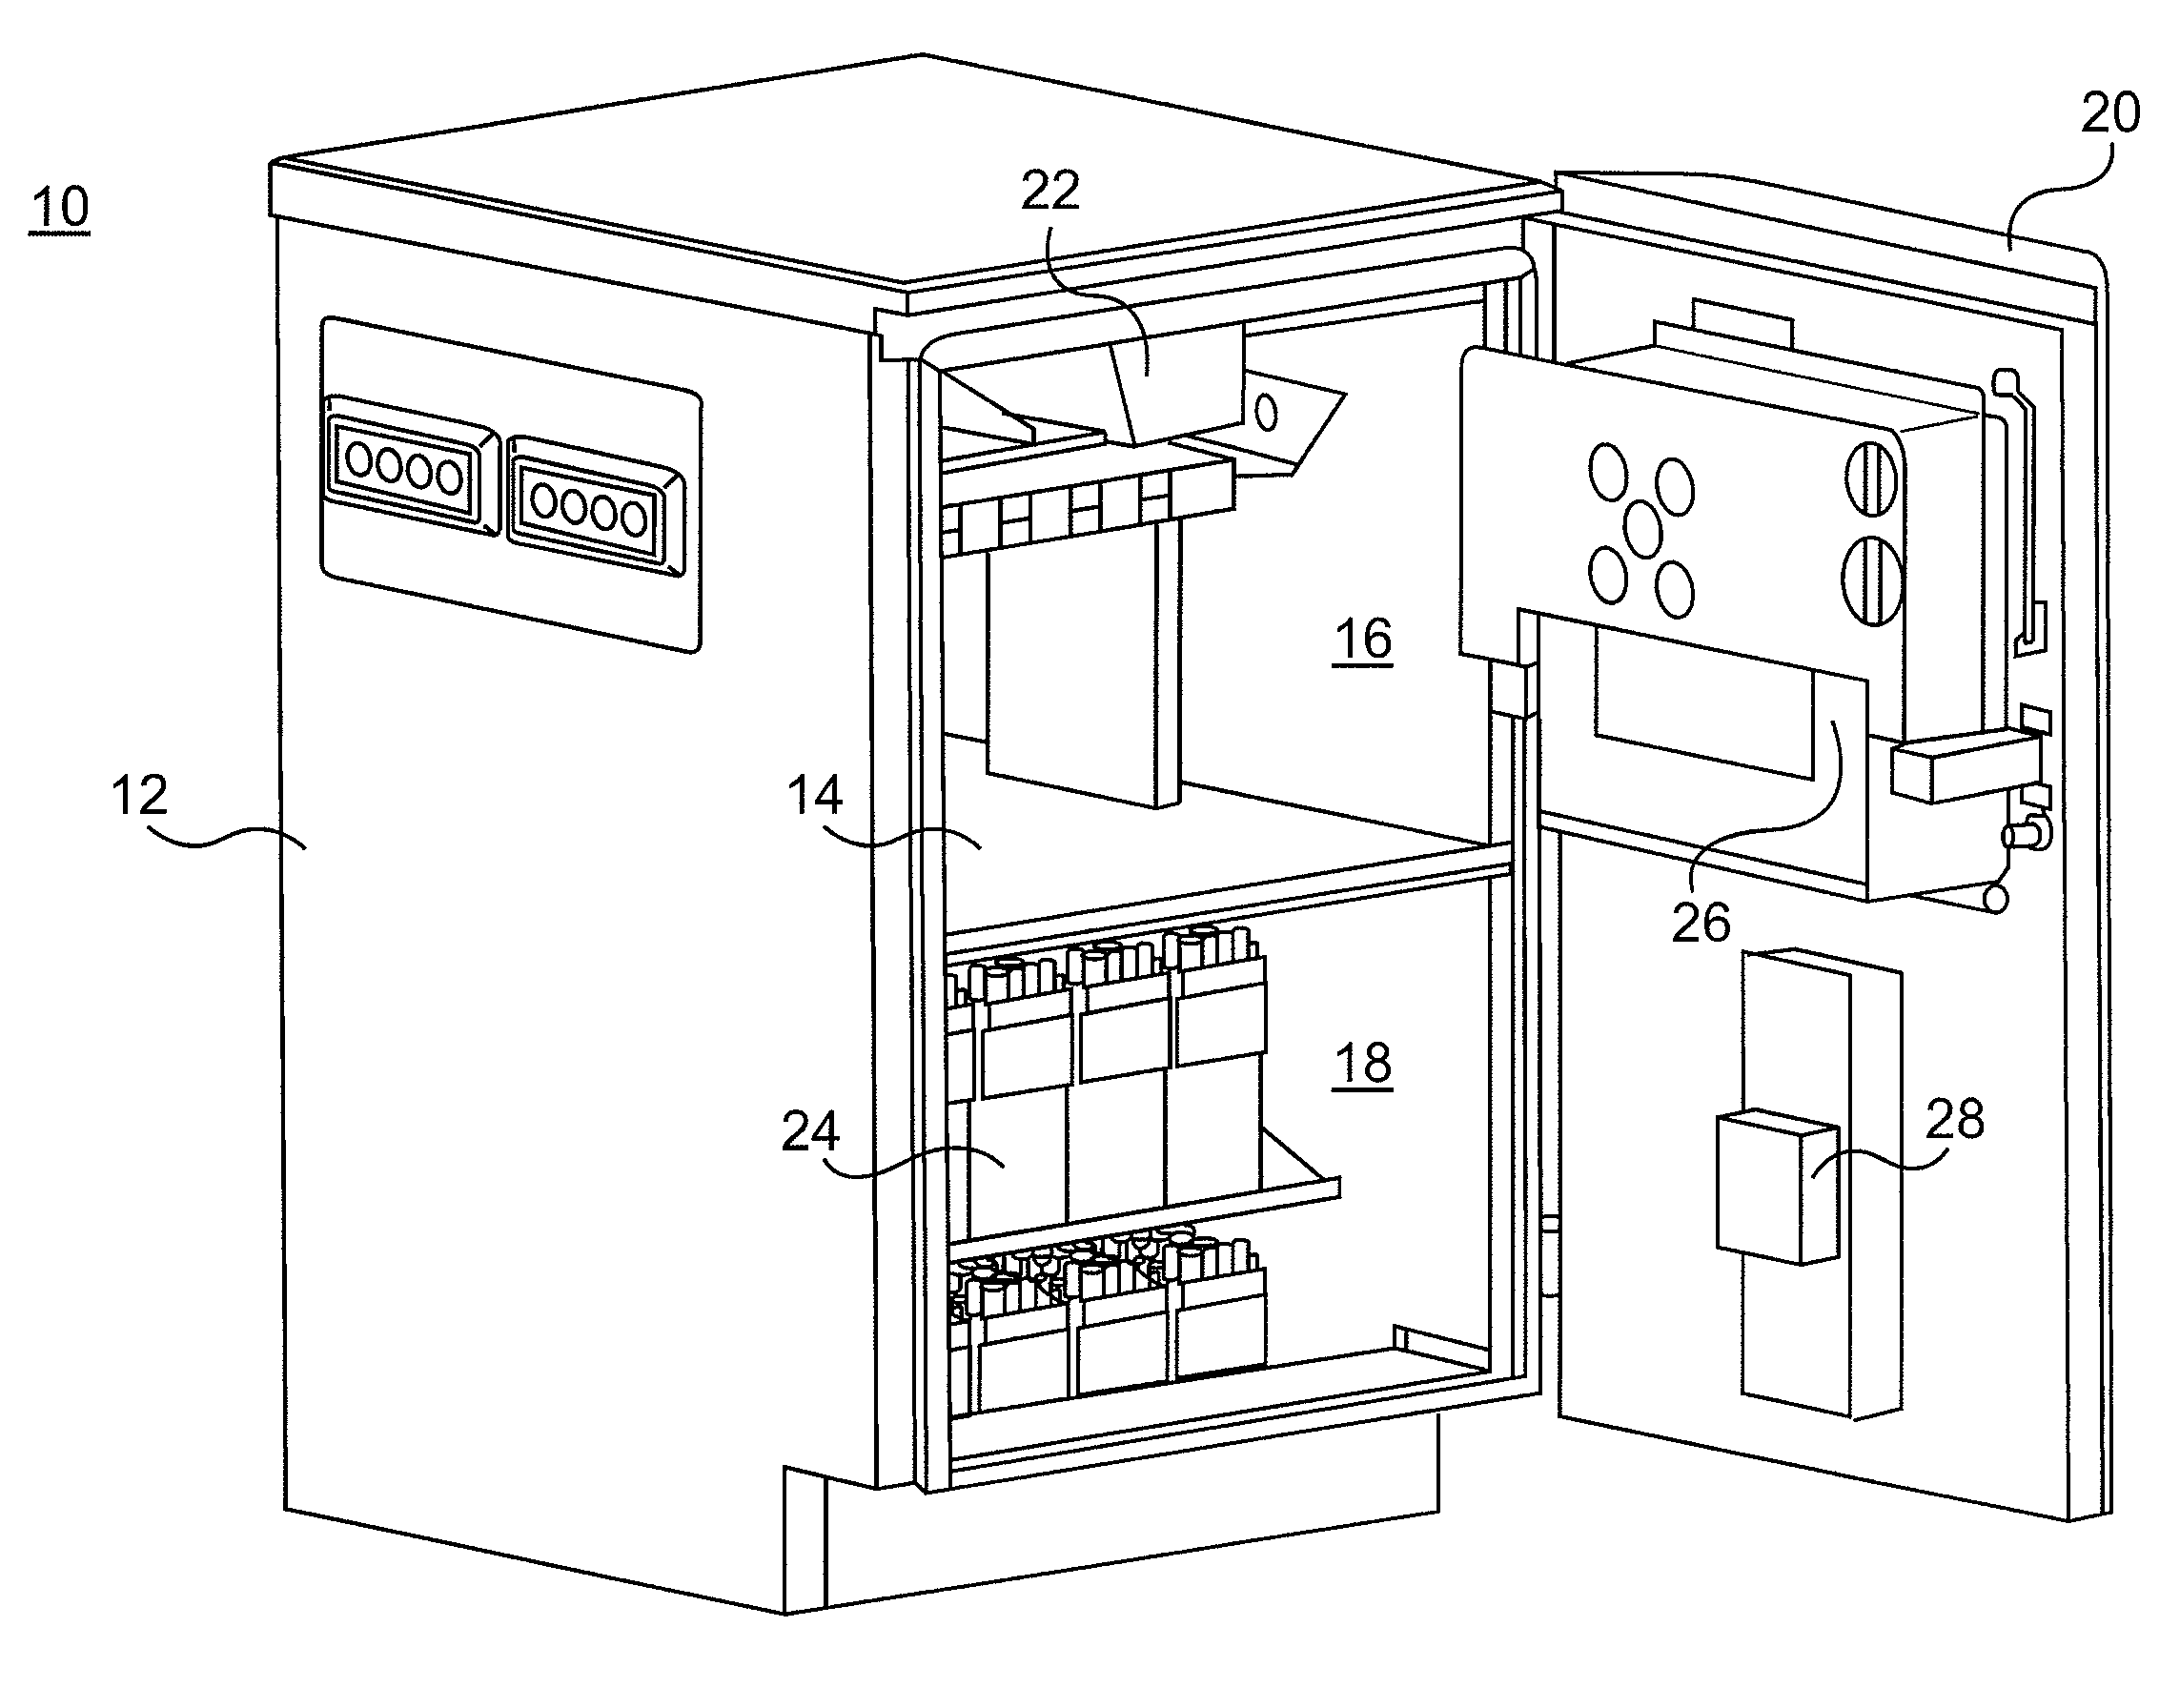 Hybrid cooling system for outdoor electronics enclosure